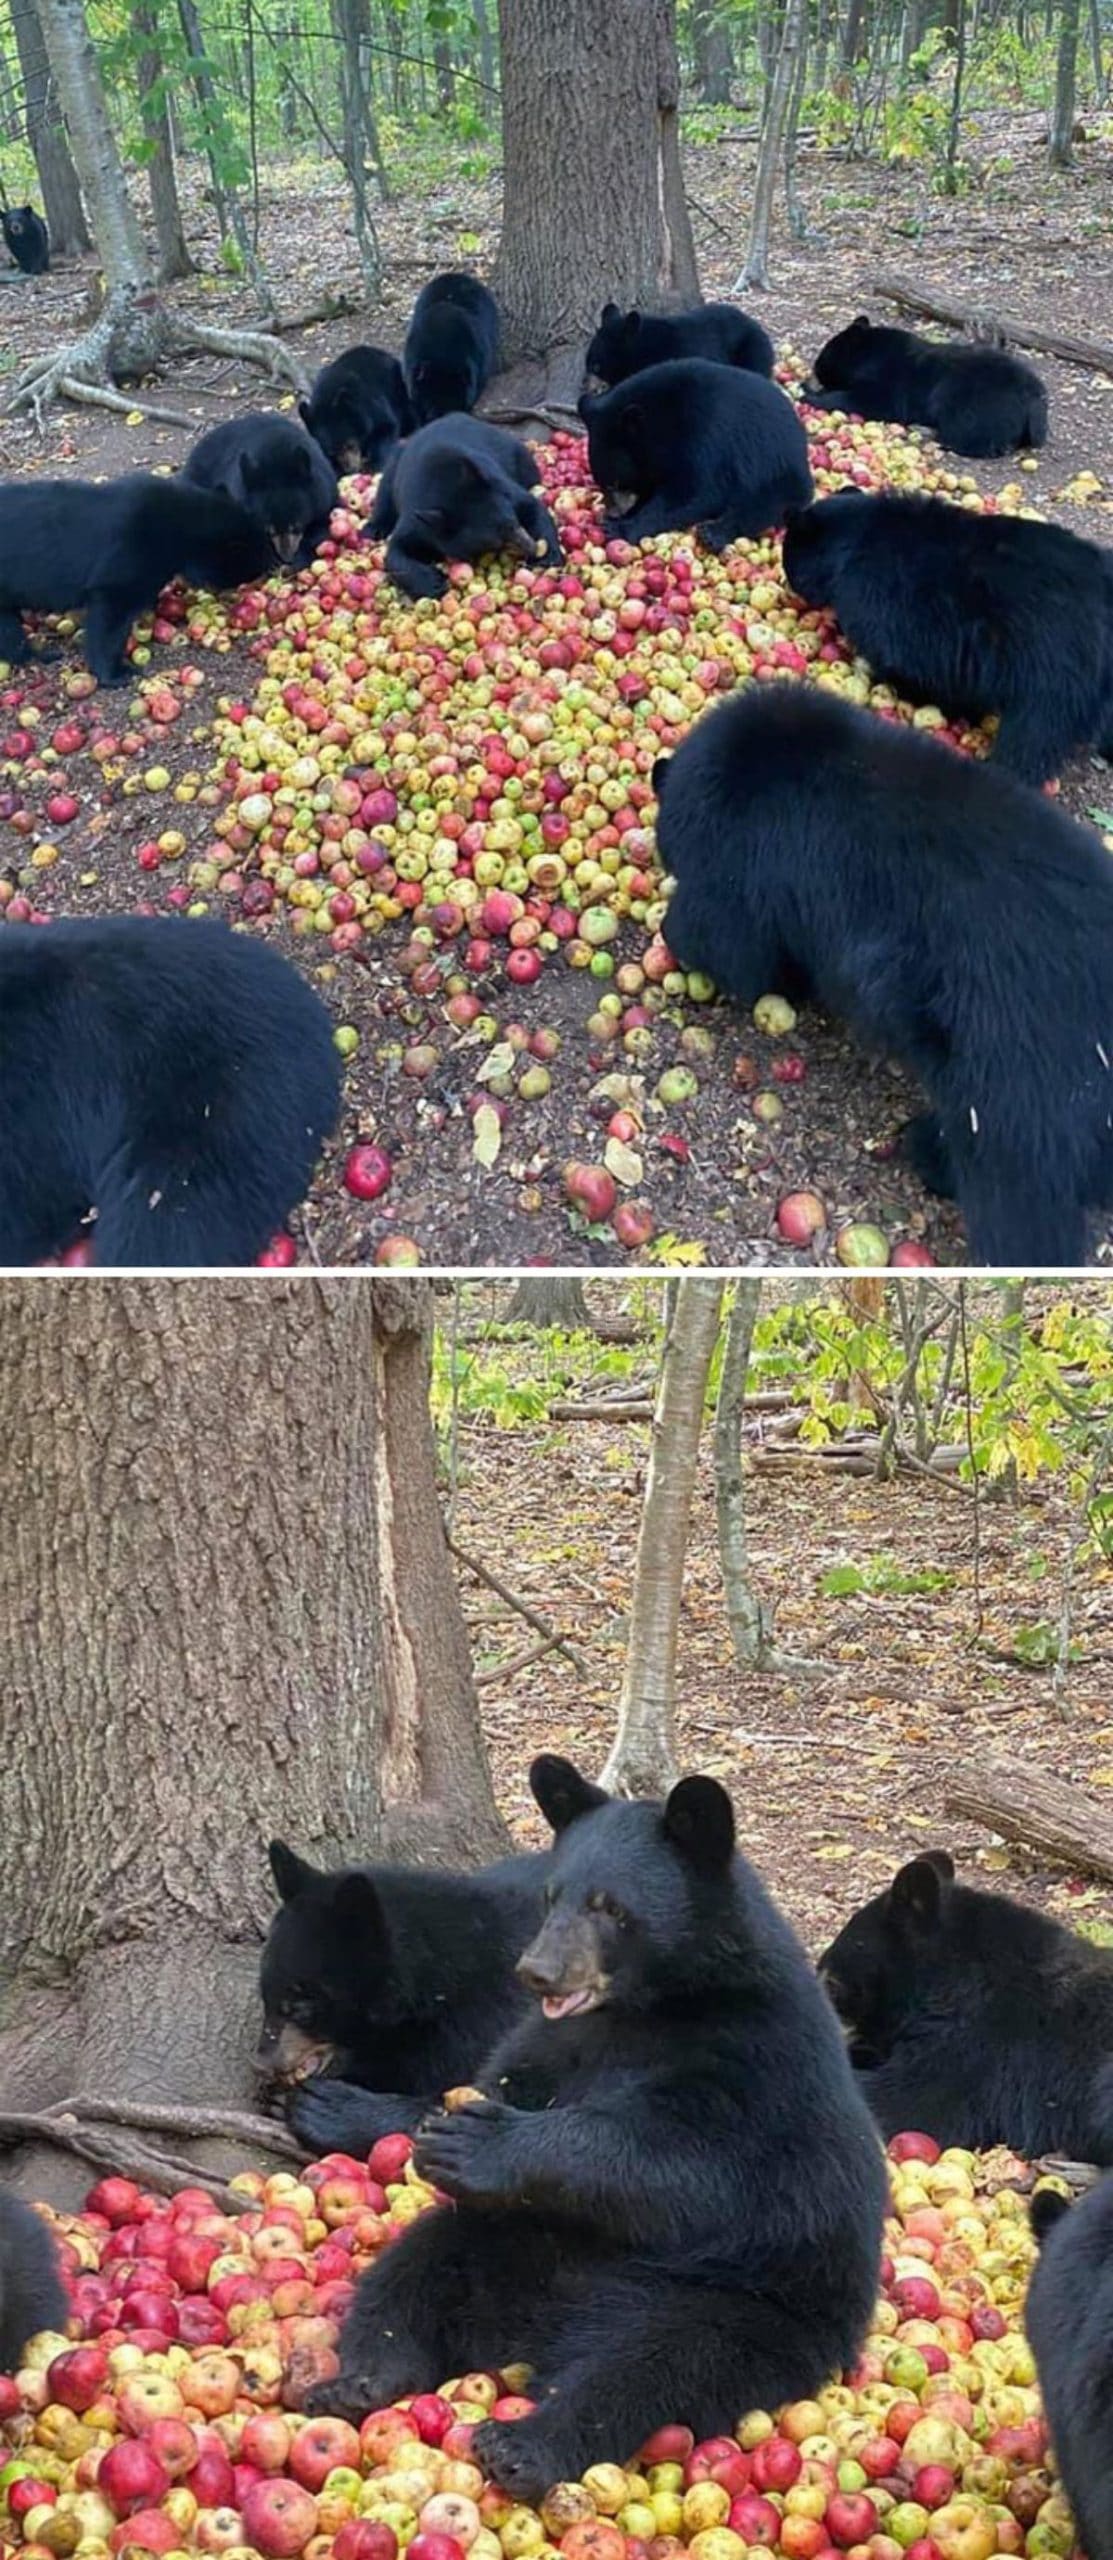 2 photos of a group of black bears eating apples on the ground